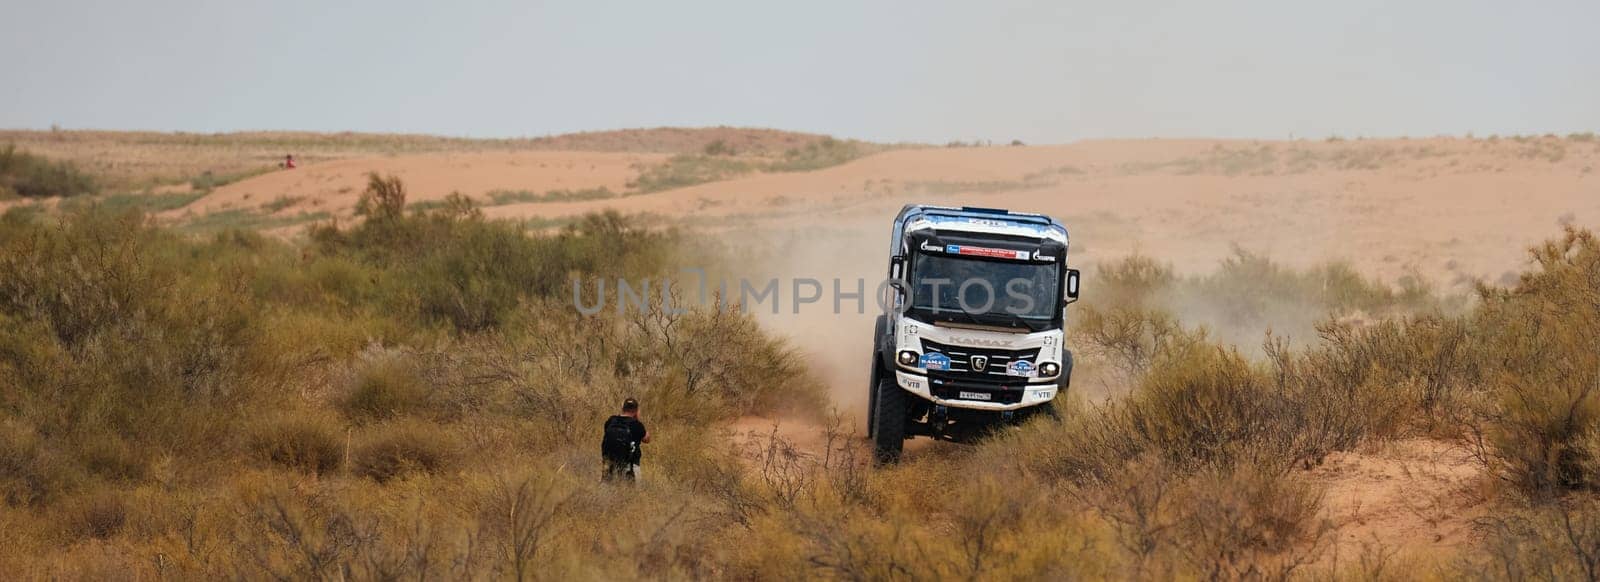 Sports truck KAMAZ gets over the difficult part of the route during the Rally raid in sand. Photographer shoots truck racing. 14.07.2022 Kalmykia, Russia by EvgeniyQW